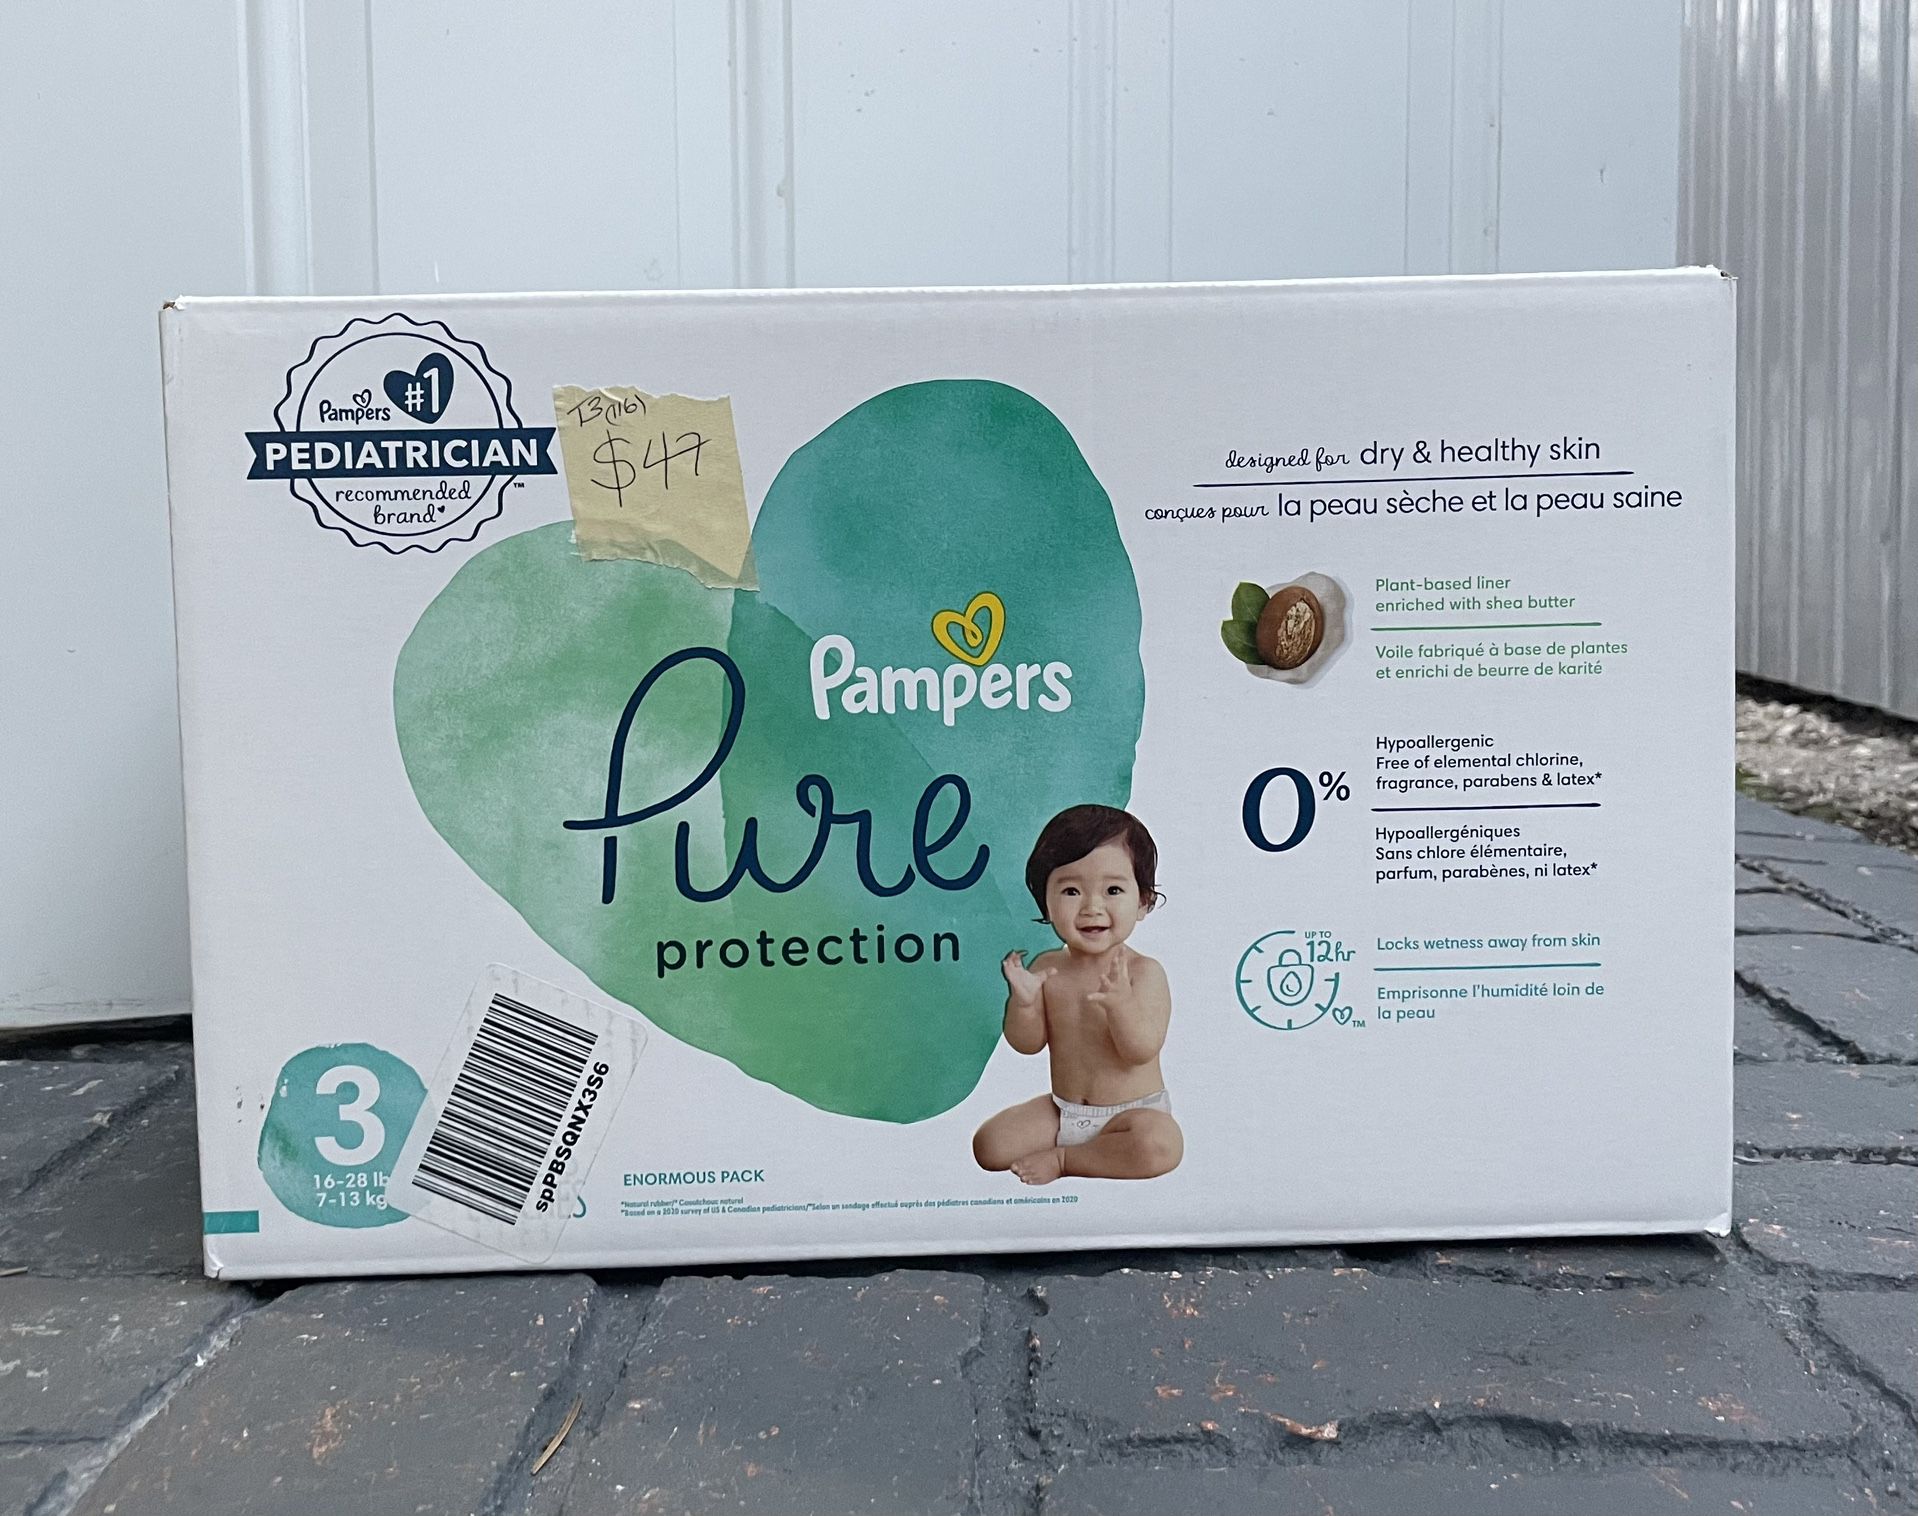 Diapers Size 3, 116 Count - Pampers Pure Protection Disposable Baby Diapers, Hypoallergenic and Unscented Protection, Enormous Pack (Packaging & Print